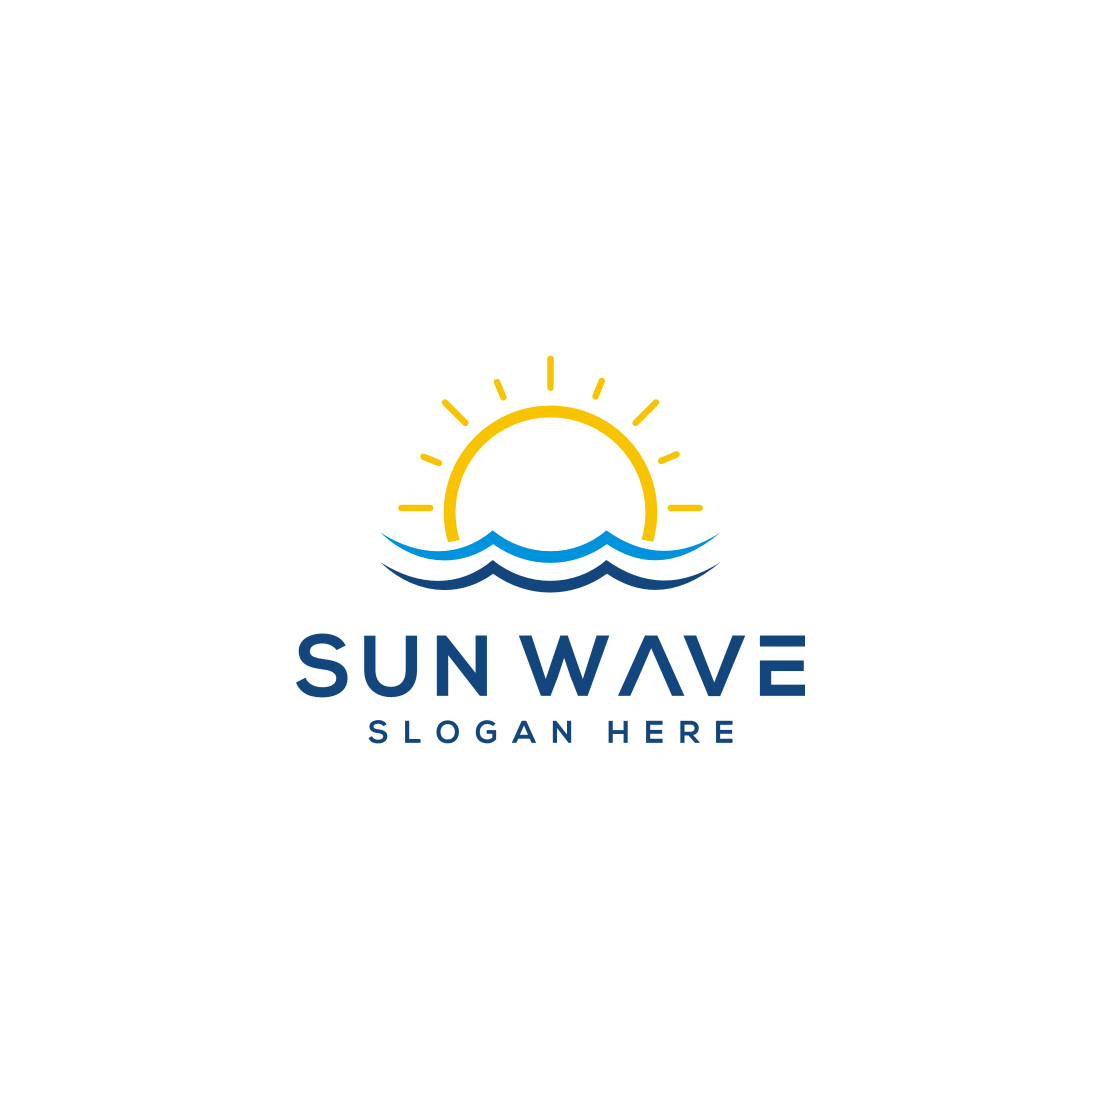 Sun and Wave Logo Vector main cover.